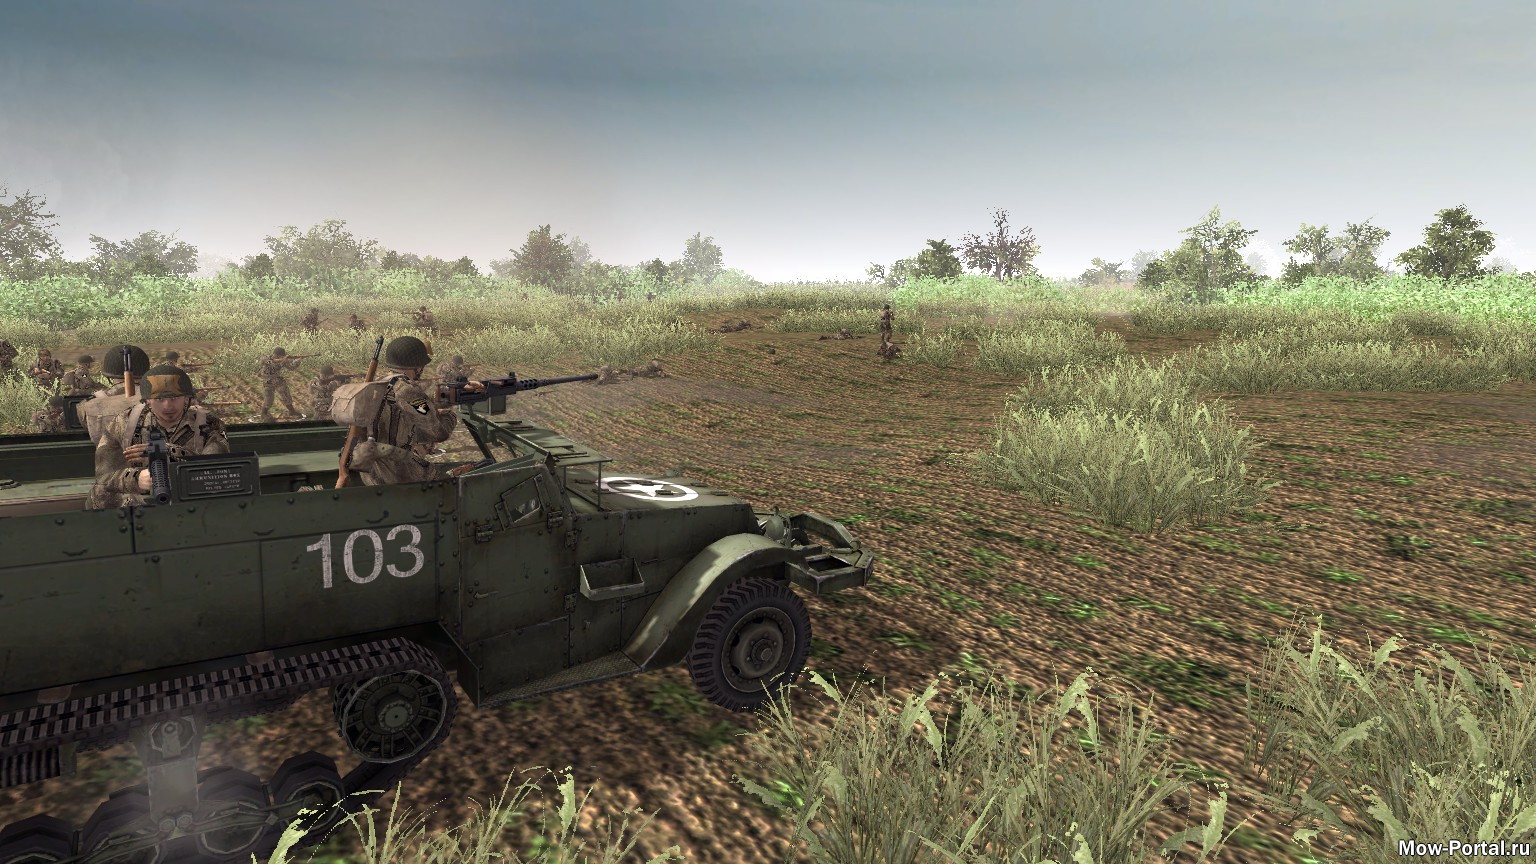 Brecourt Manor Assault - Band of Brothers 2.0 (AS2 — 3.262.0) (v13.07.2020)